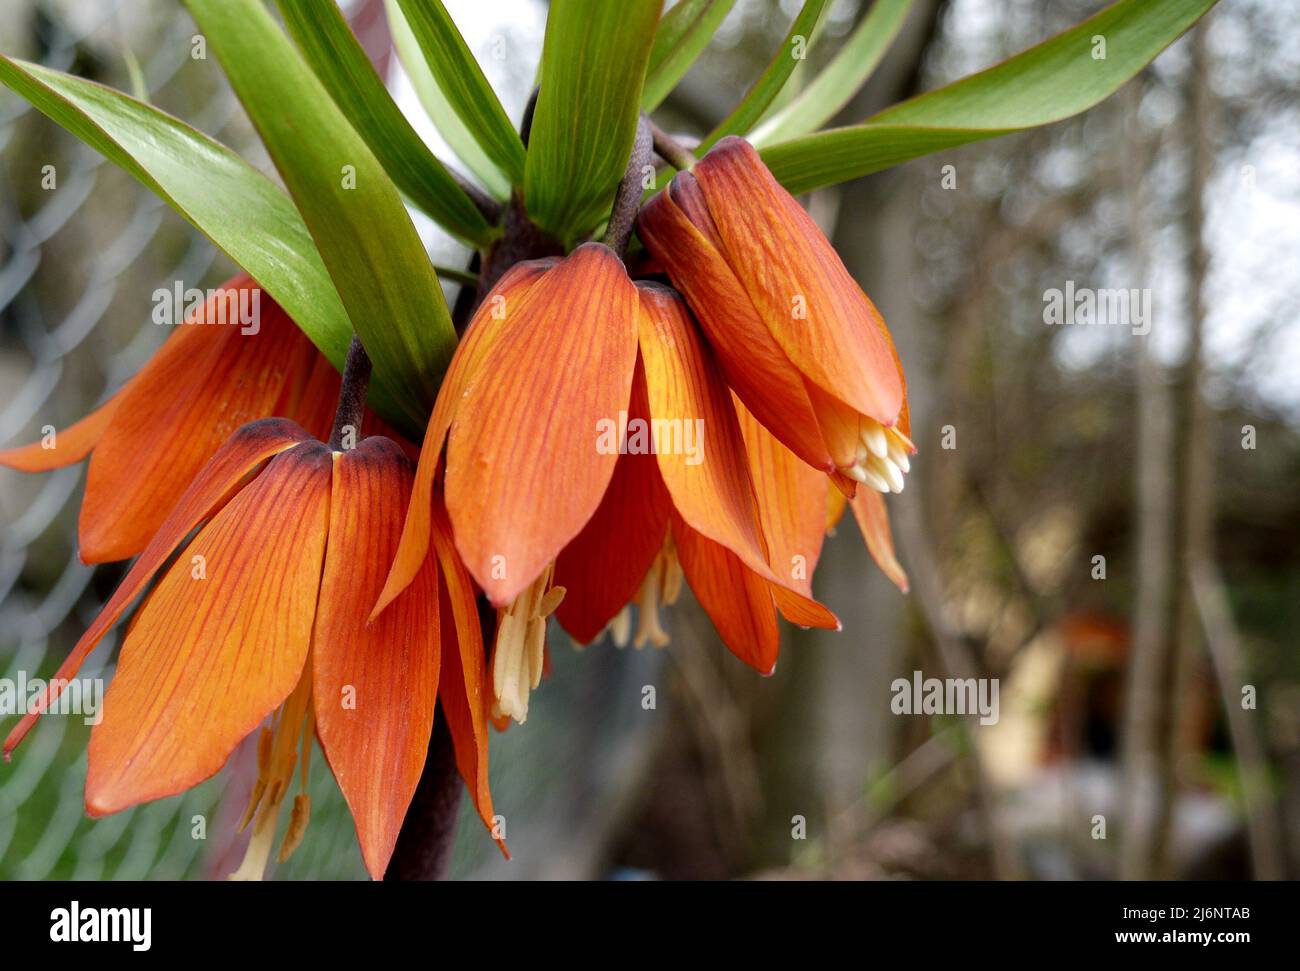 Fritillaria Imperialis Blossoming Flower Closeup Stock Photo Alamy